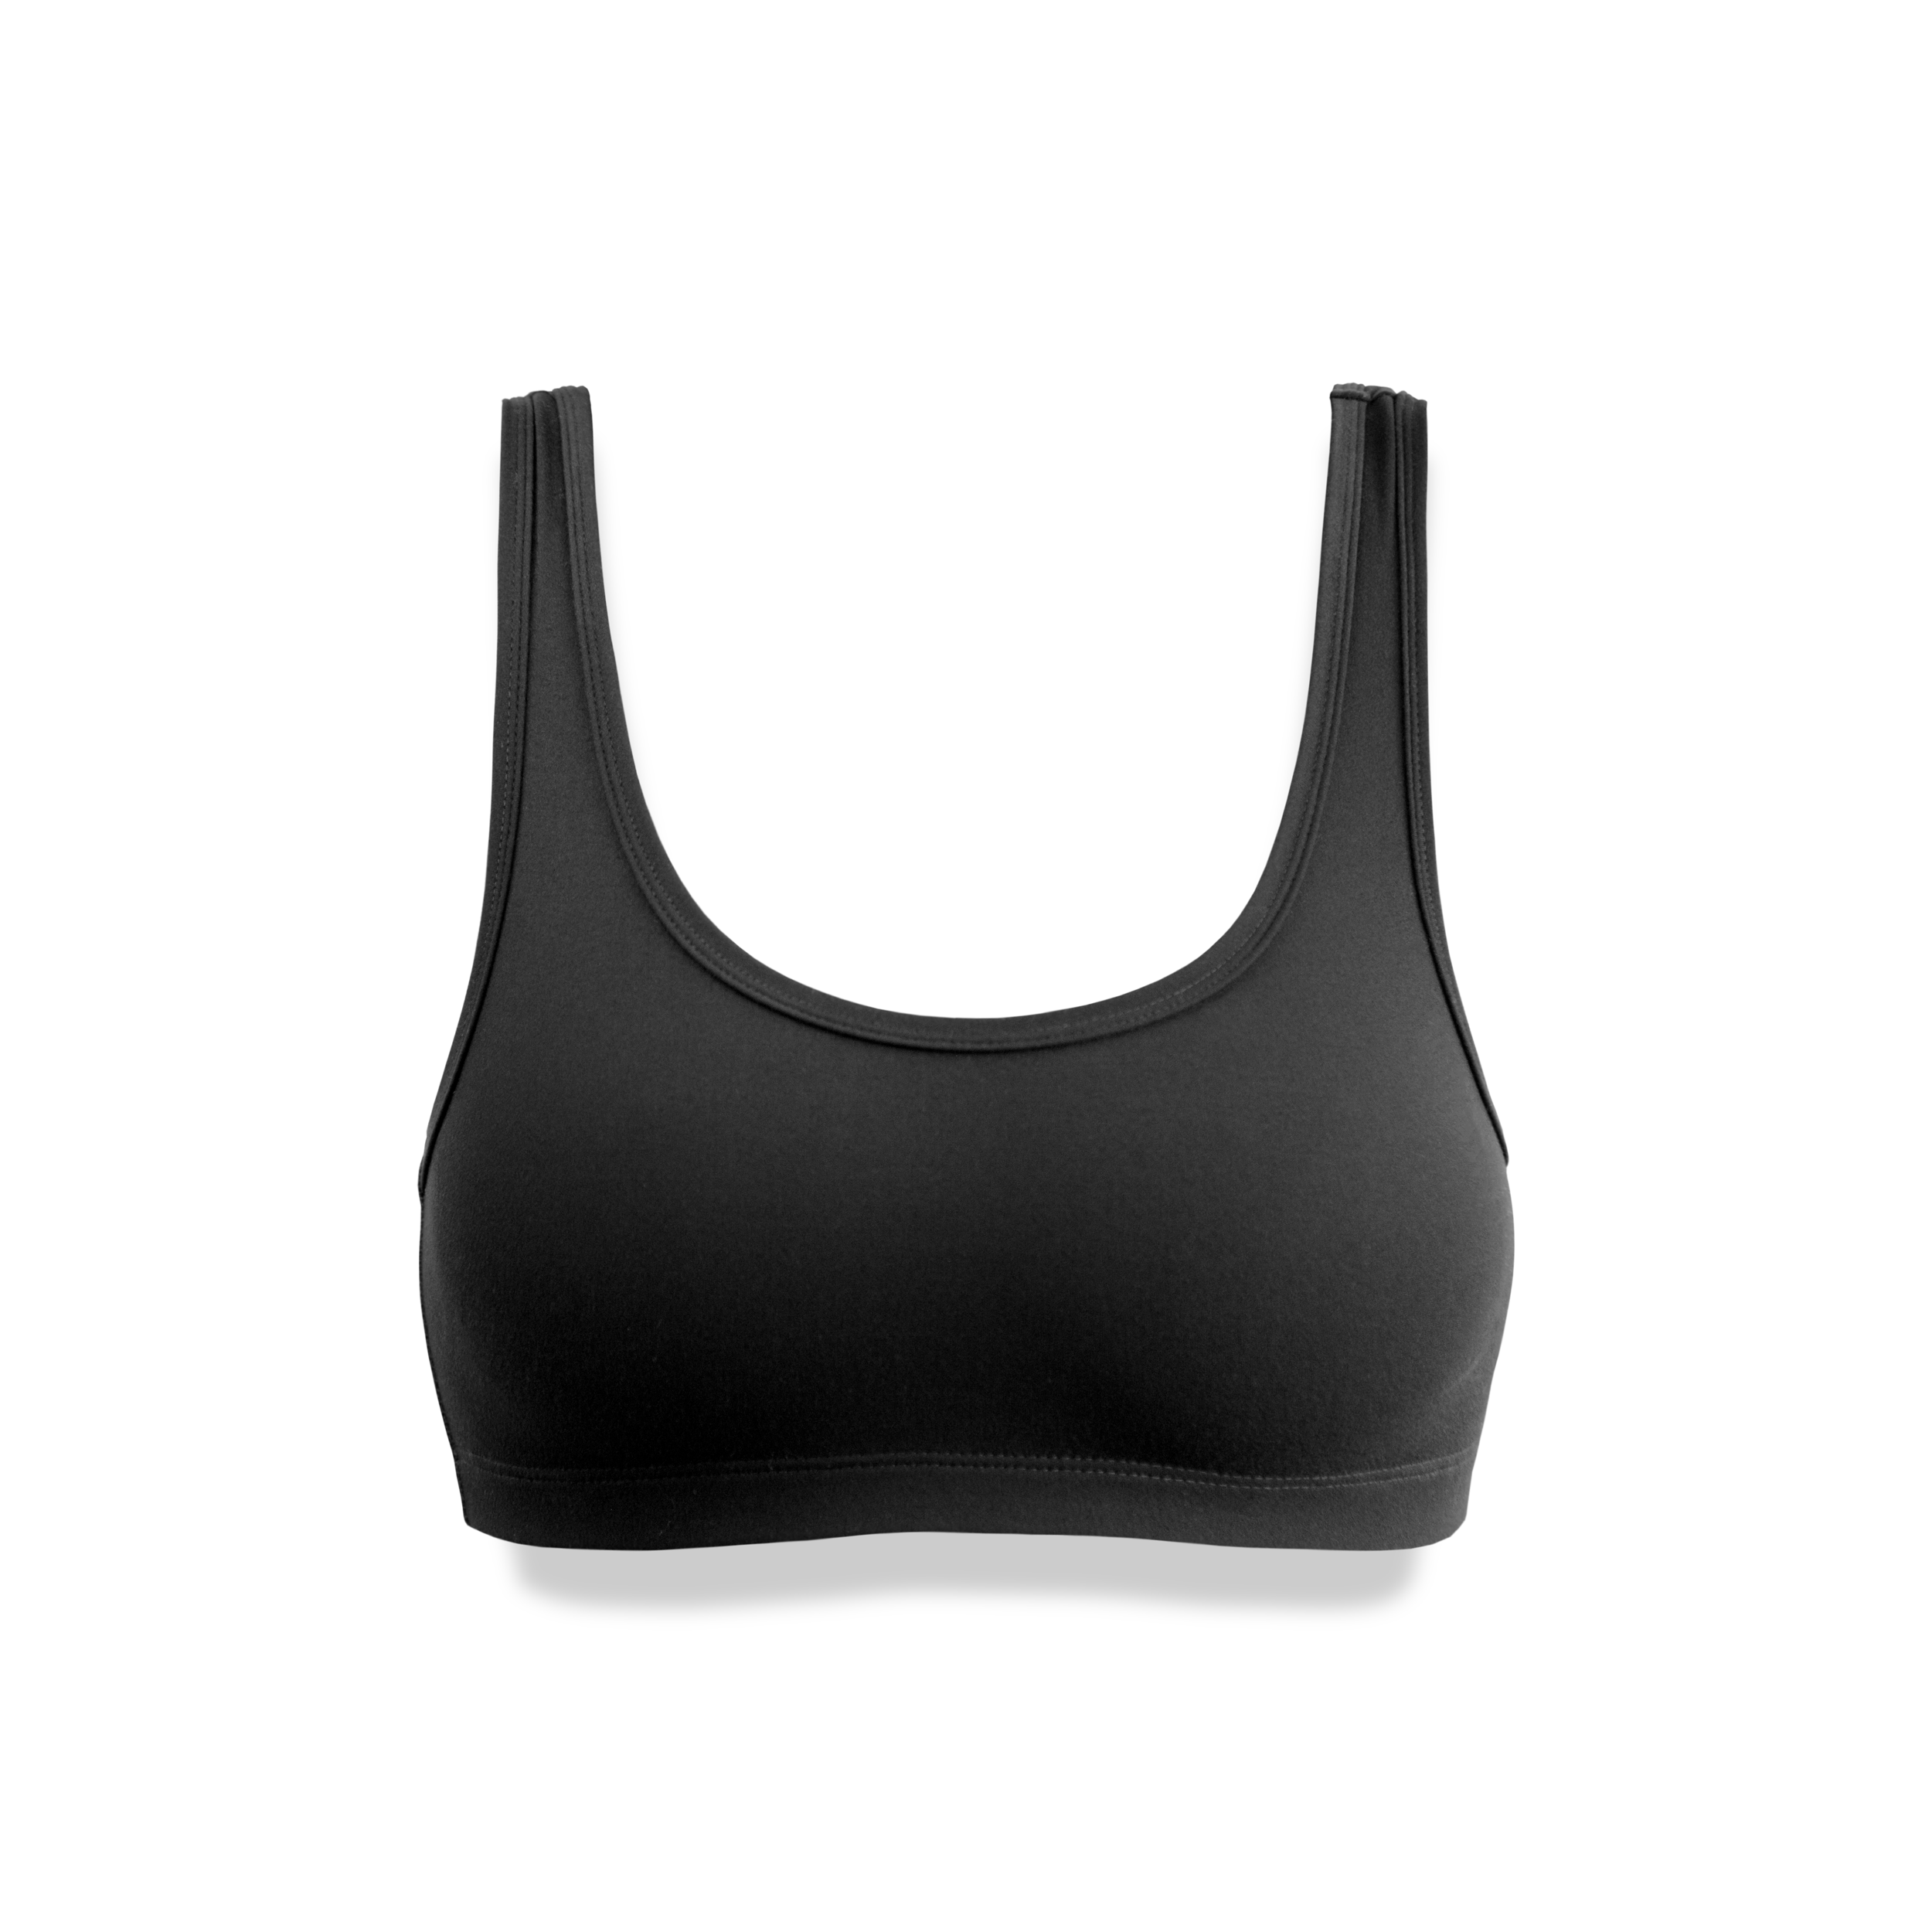 Ethically made leggins and sports bras from VEOM - Vbazaar